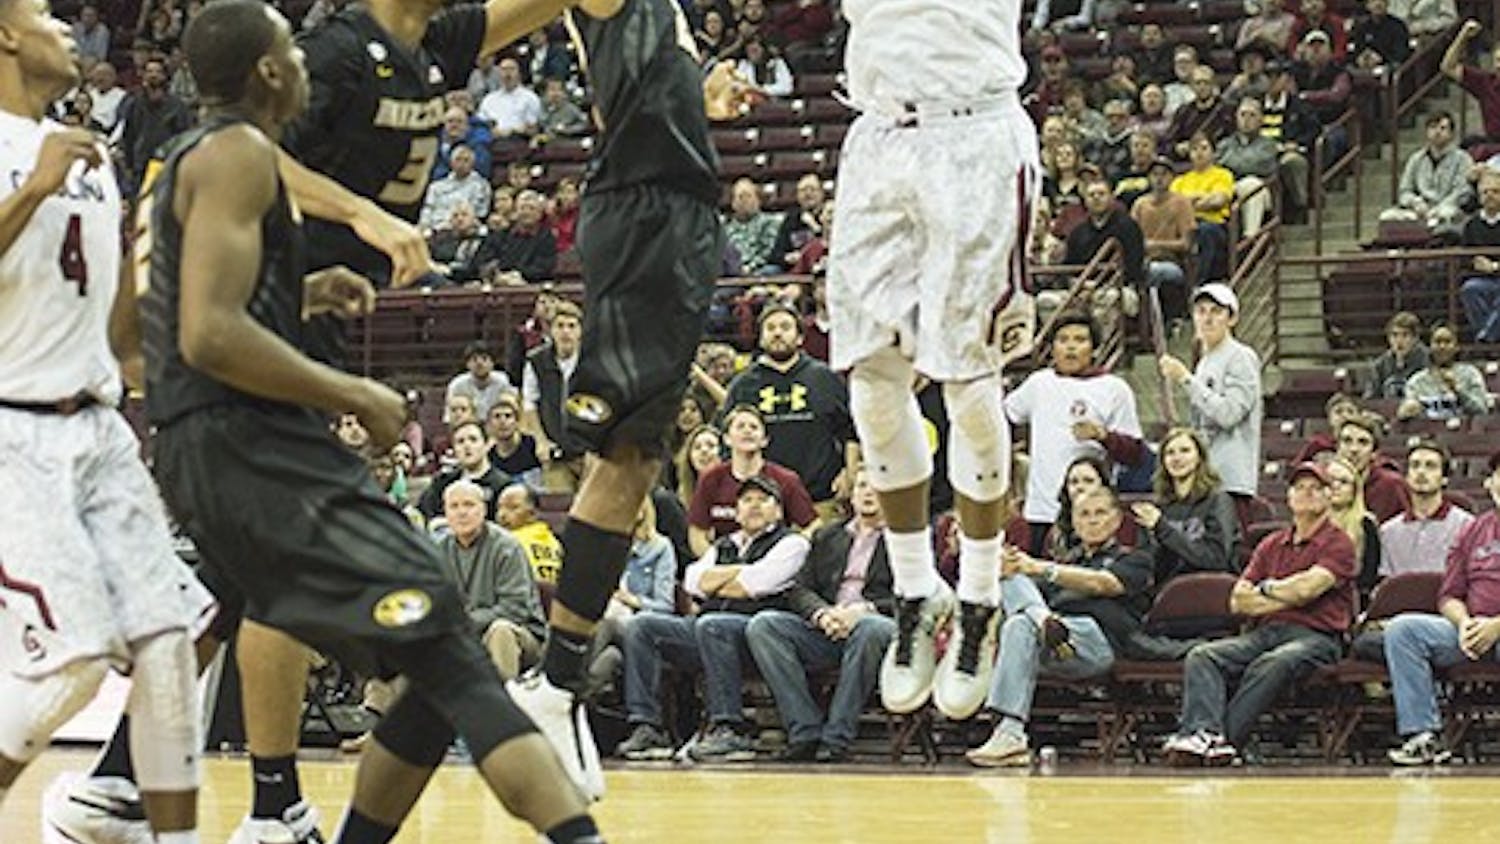 South Carolina will face Missouri in the first round of the 2015 SEC tournament on Wednesday, March 11. South Carolina defeated Missouri 65-60 on February 10 behind a 14-point performance from sophomore guard Sindarius Thornwell. 